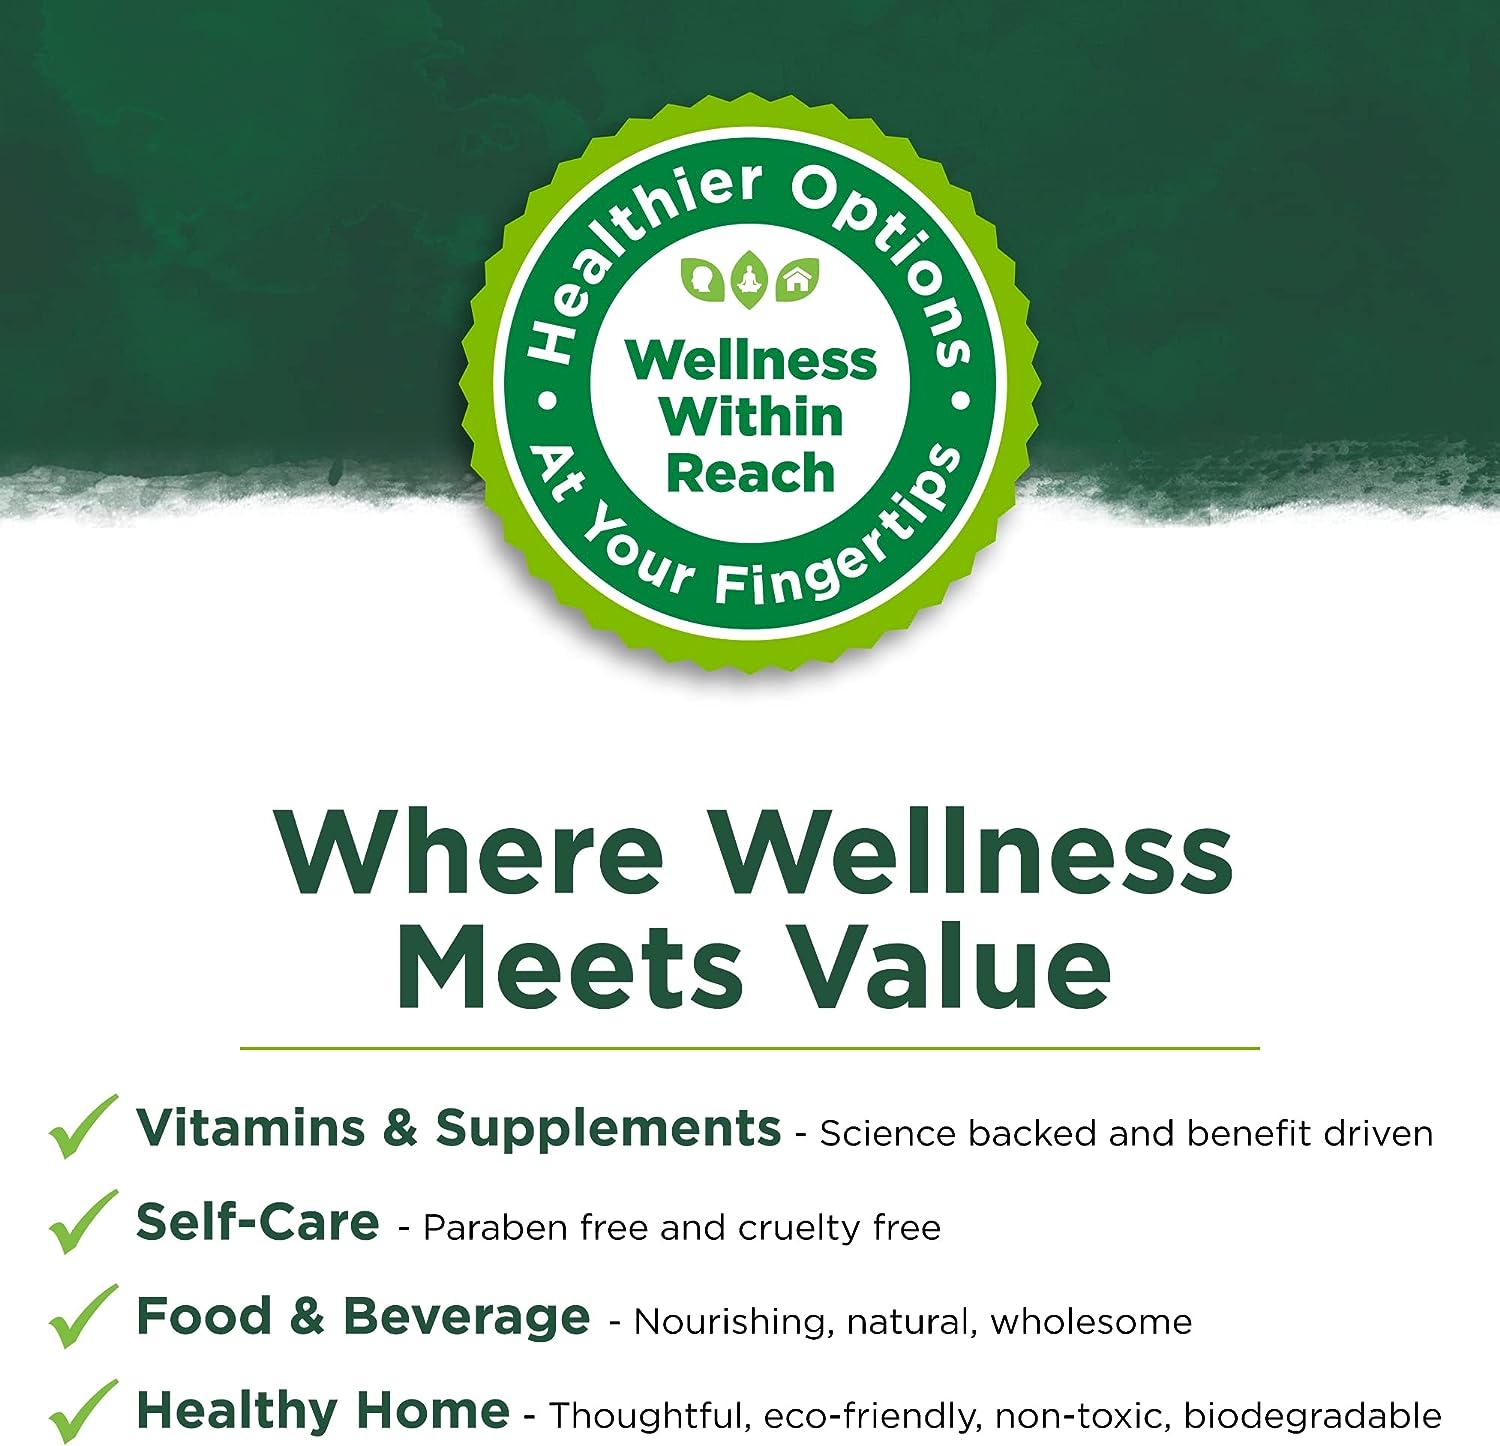 Swanson Grass Fed Cold Pressed Certified rBGH Free Hormone Free Vanill